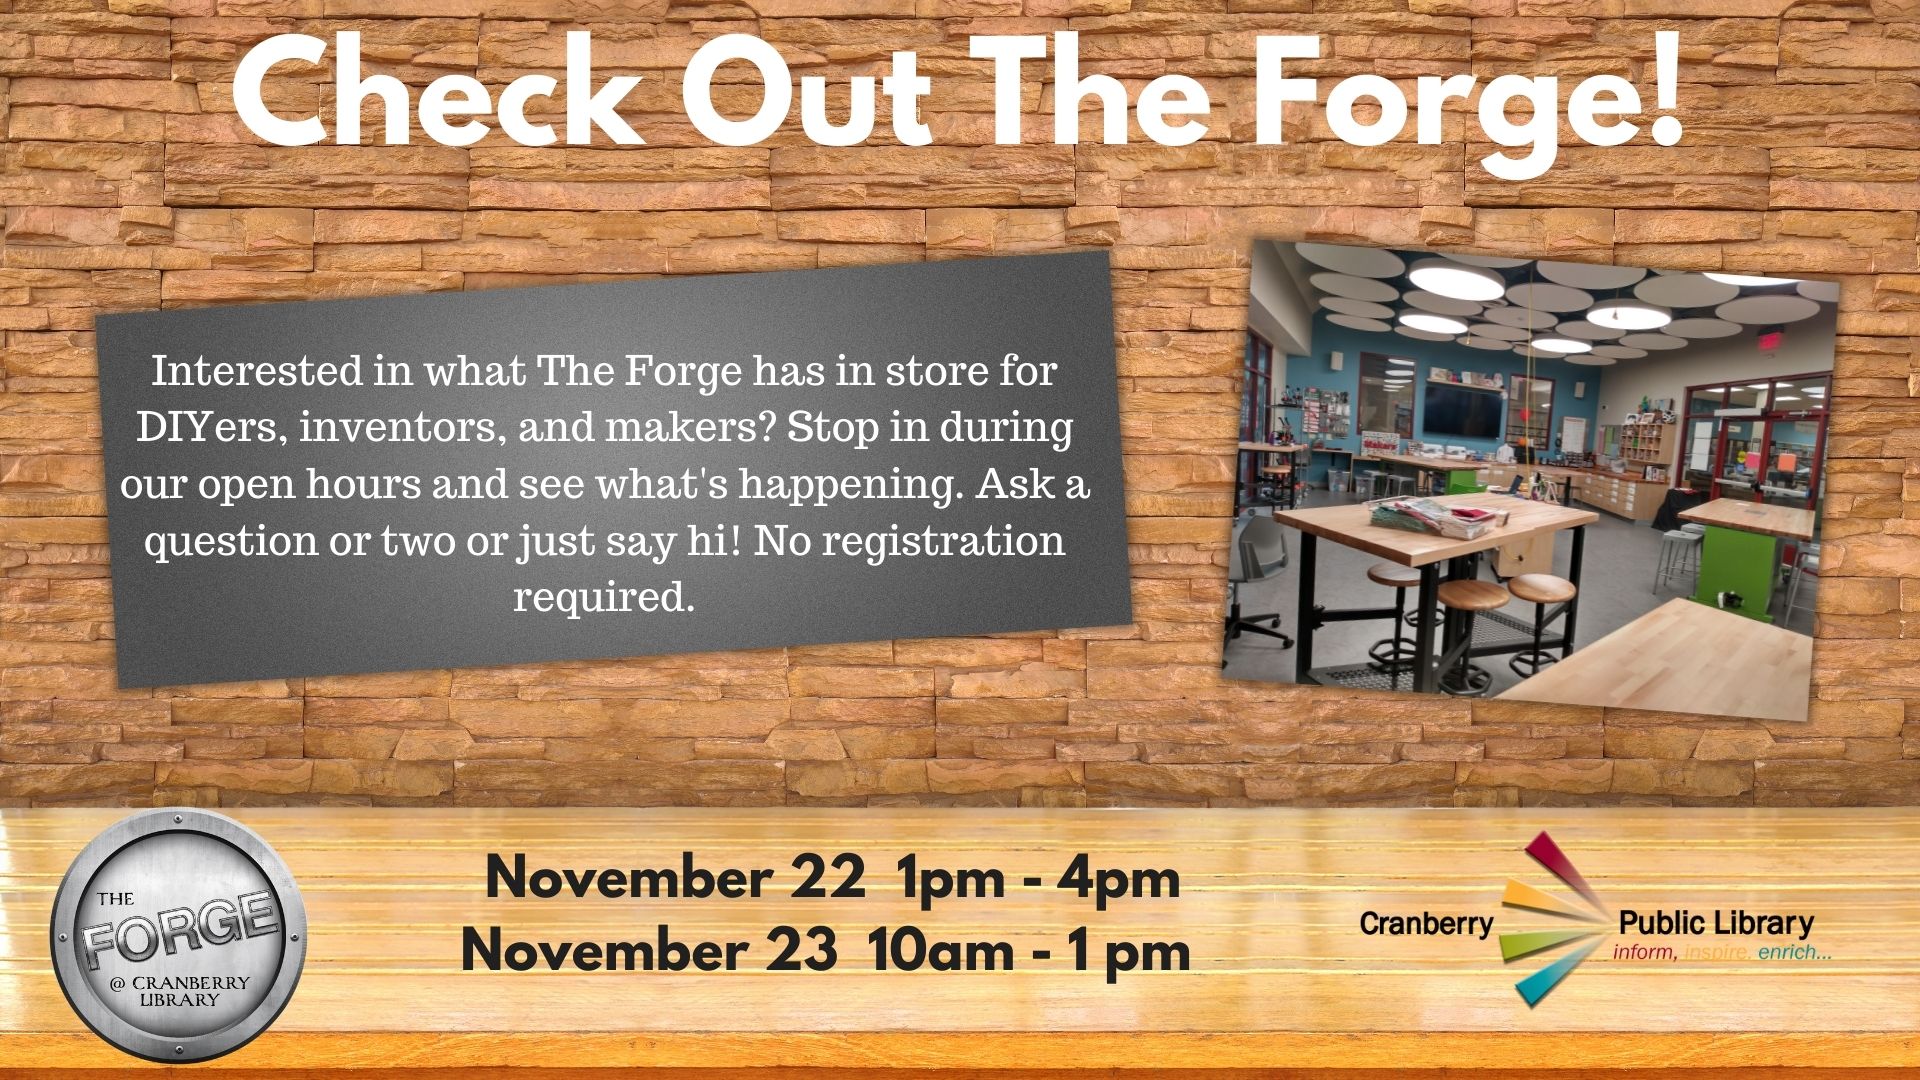 Check Out The Forge flyer